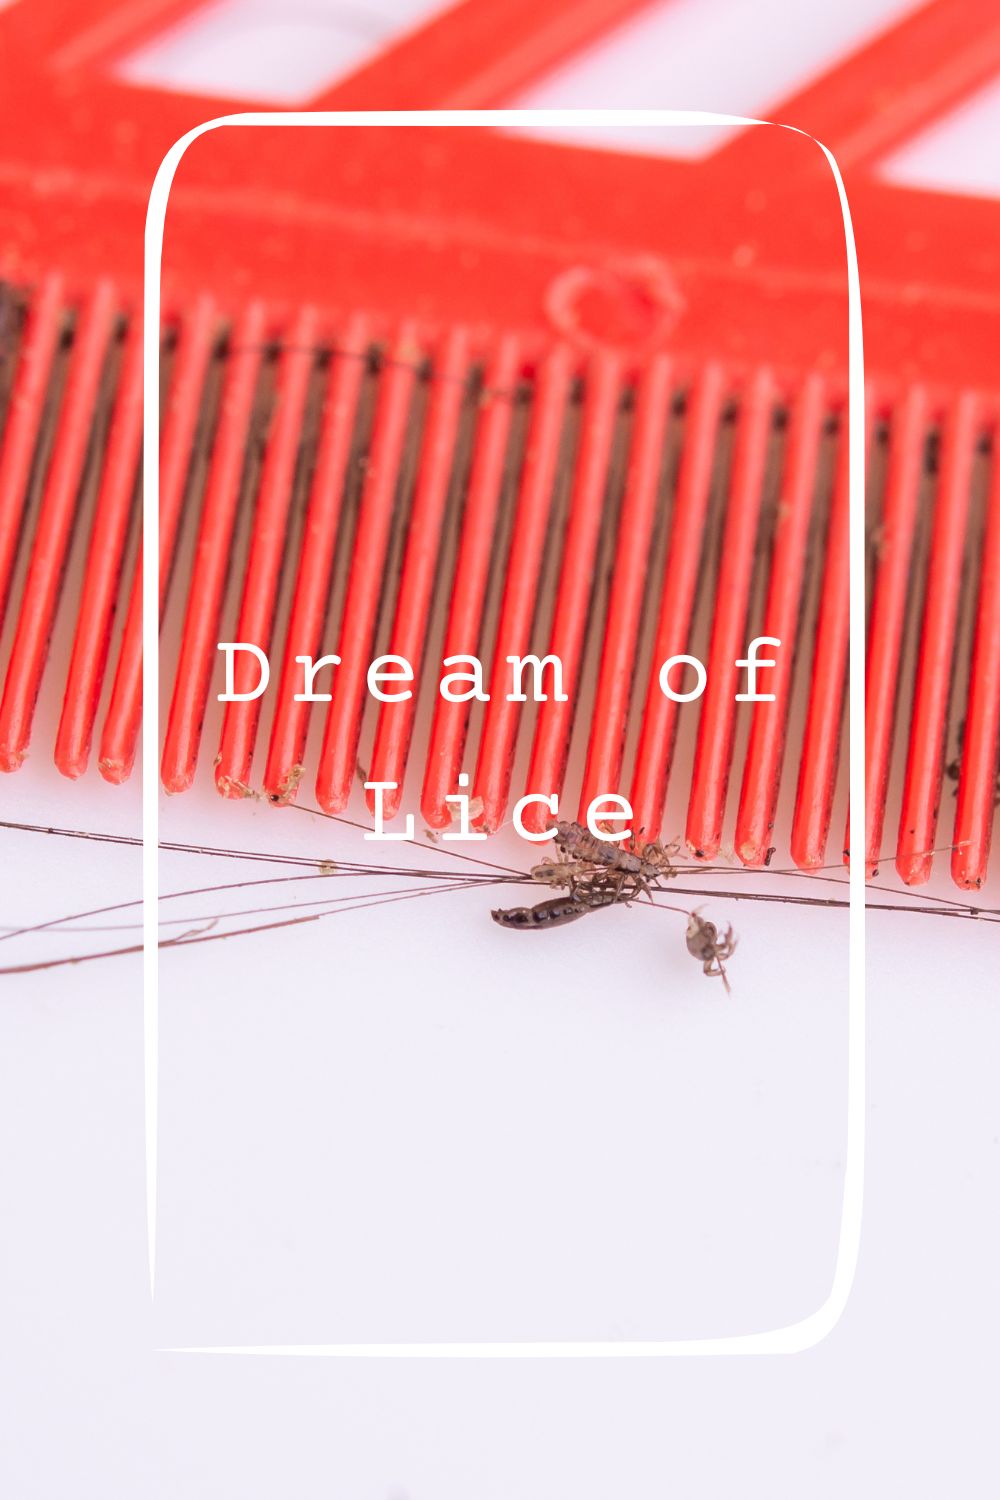 10 Dream of Lice Meanings4